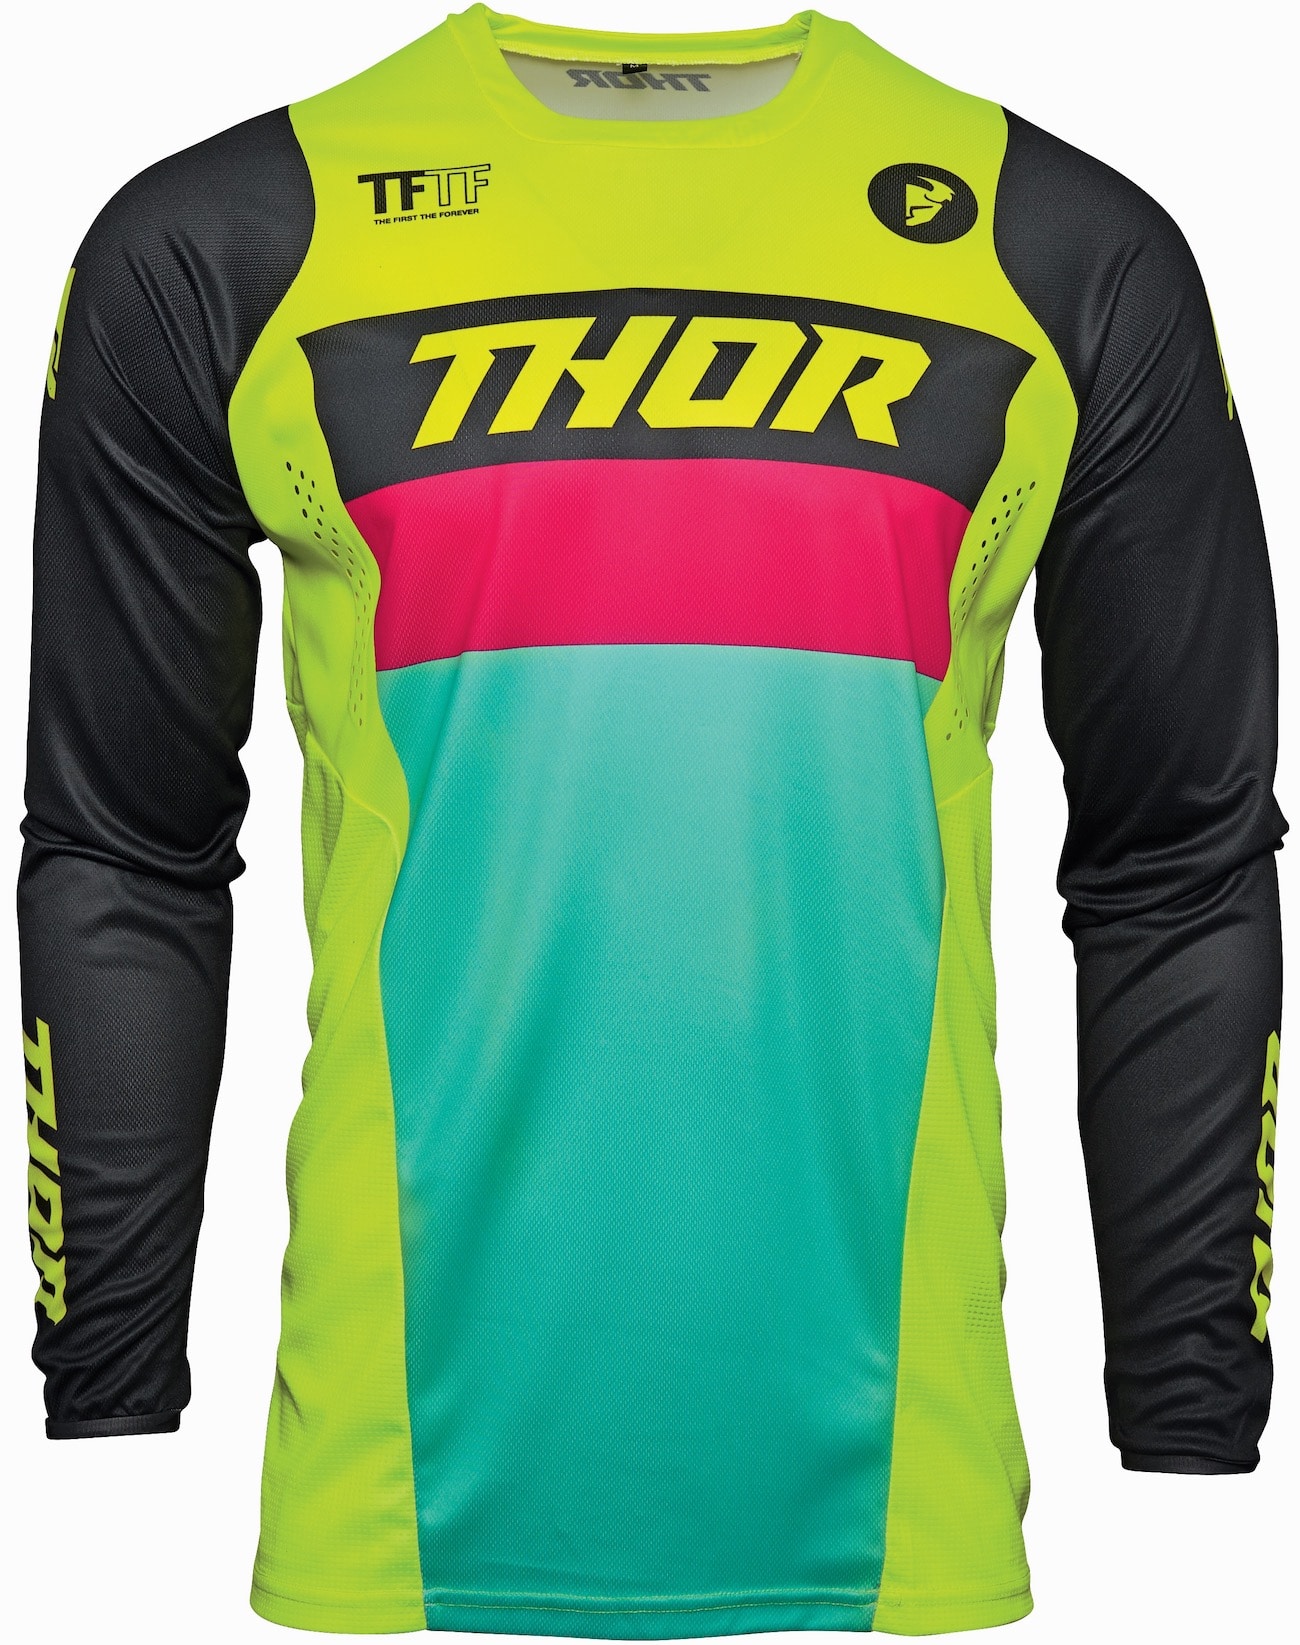 2018 Thor Pulse Level Blue Lime Motocross Off Road Race Jersey Adults XL 